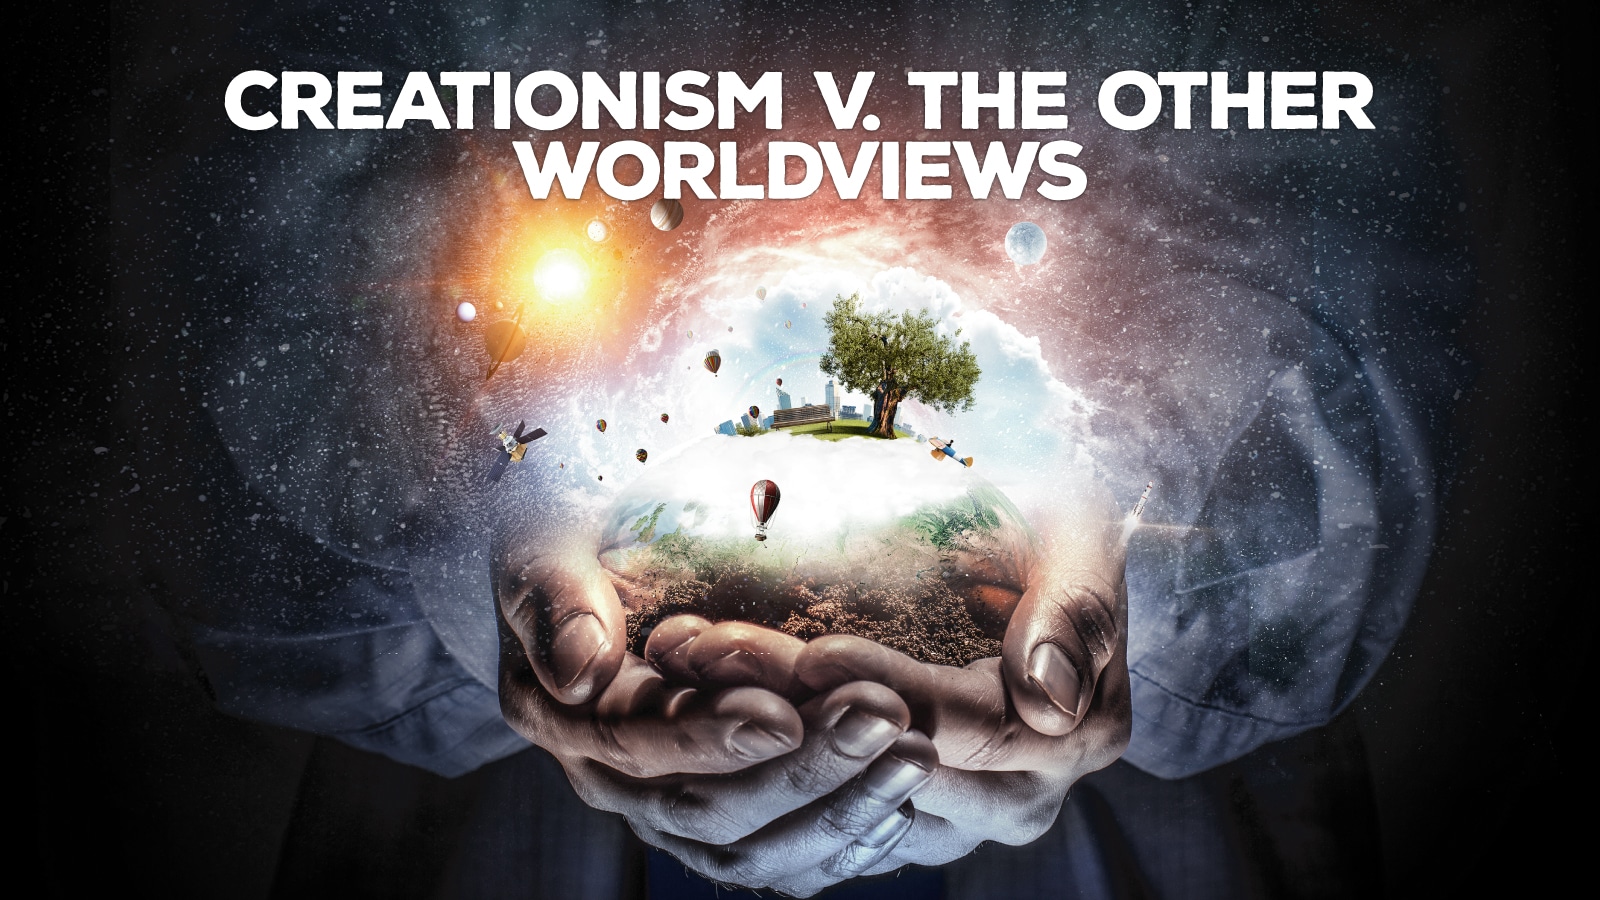 Creationism and other worldviews